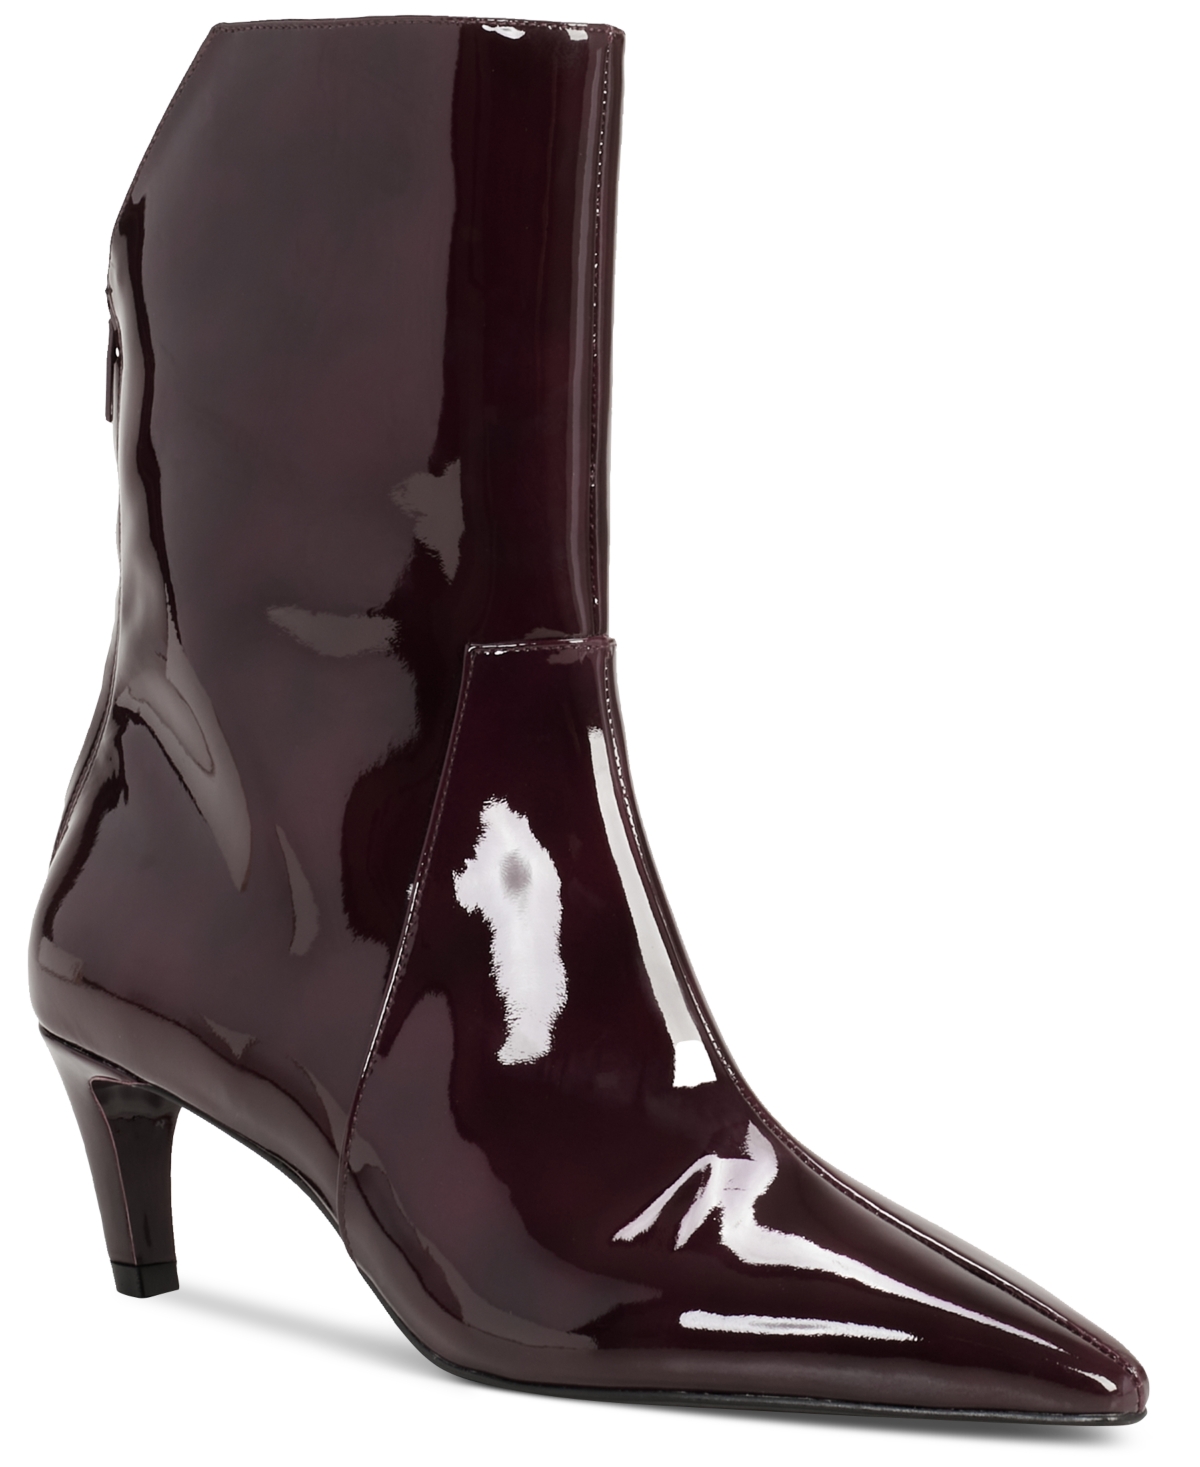 VINCE CAMUTO WOMEN'S QUINDELE POINTED-TOE DRESS BOOTIES